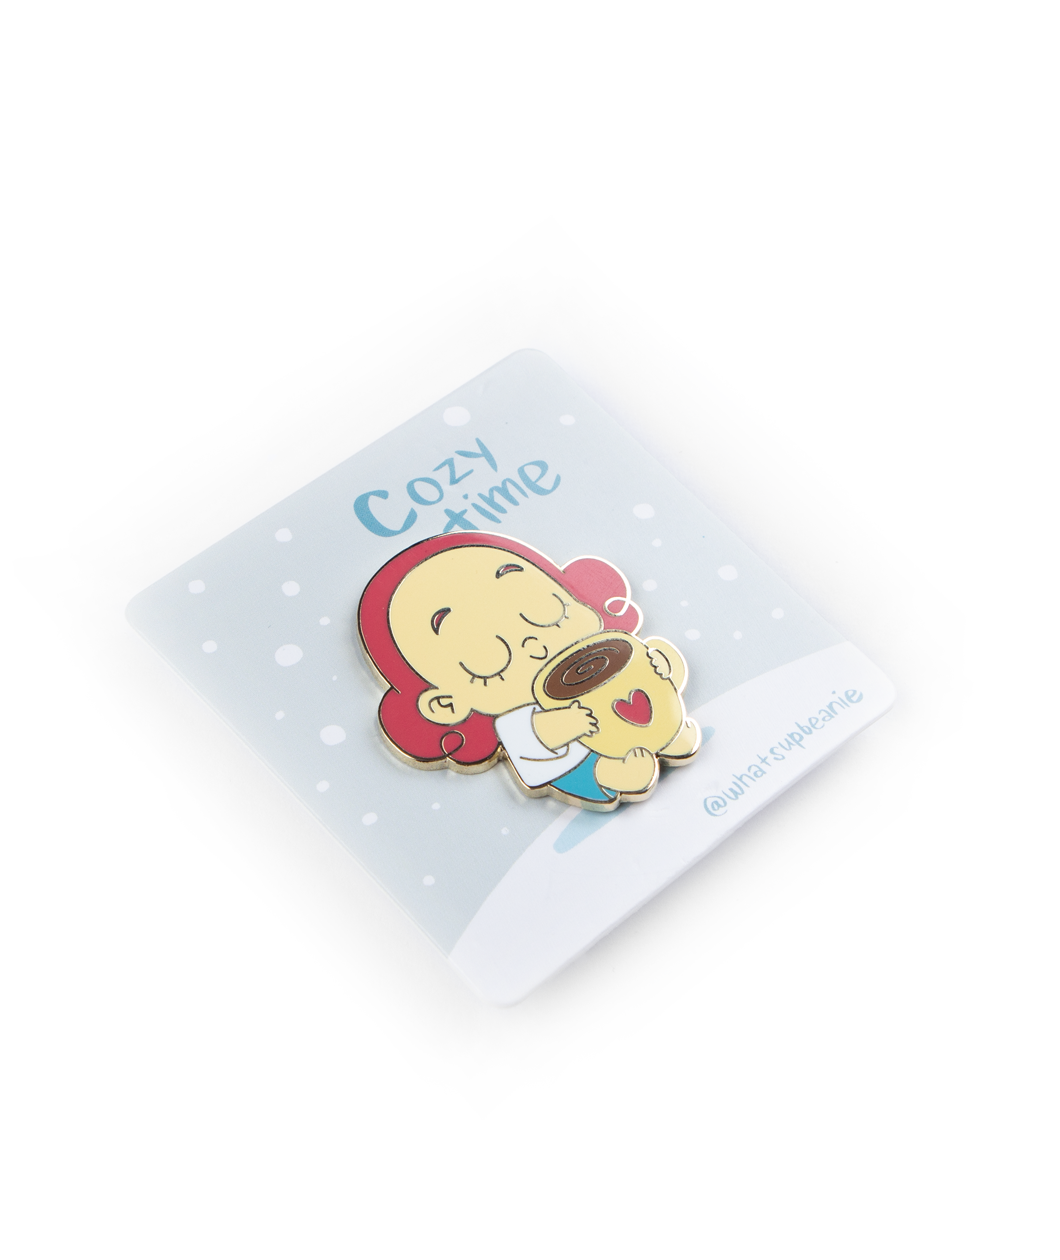  A pin of Beanie closing their eyes, with a smile holding a big mug of coffee with a heart on the front of the mug. The pin is on a card backing with falling snow and the words "Cozy Time; @whatsupbeanie".